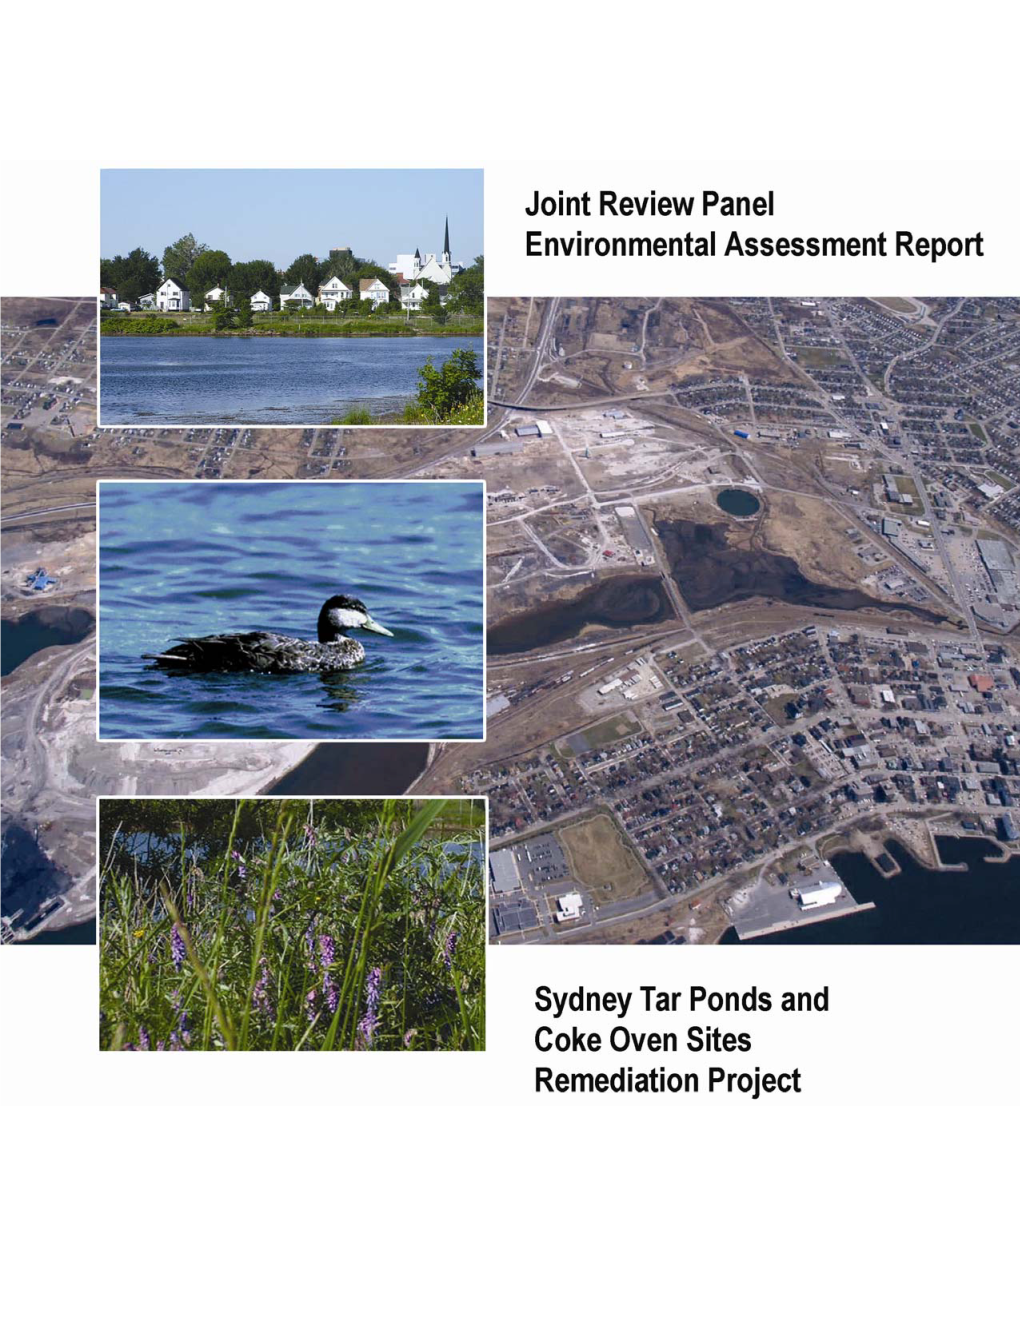 Joint Review Panel Has Completed Its Assessment of the Sydney Tar Ponds and Coke Ovens Sites Remediation Project As Proposed by the Sydney Tar Ponds Agency